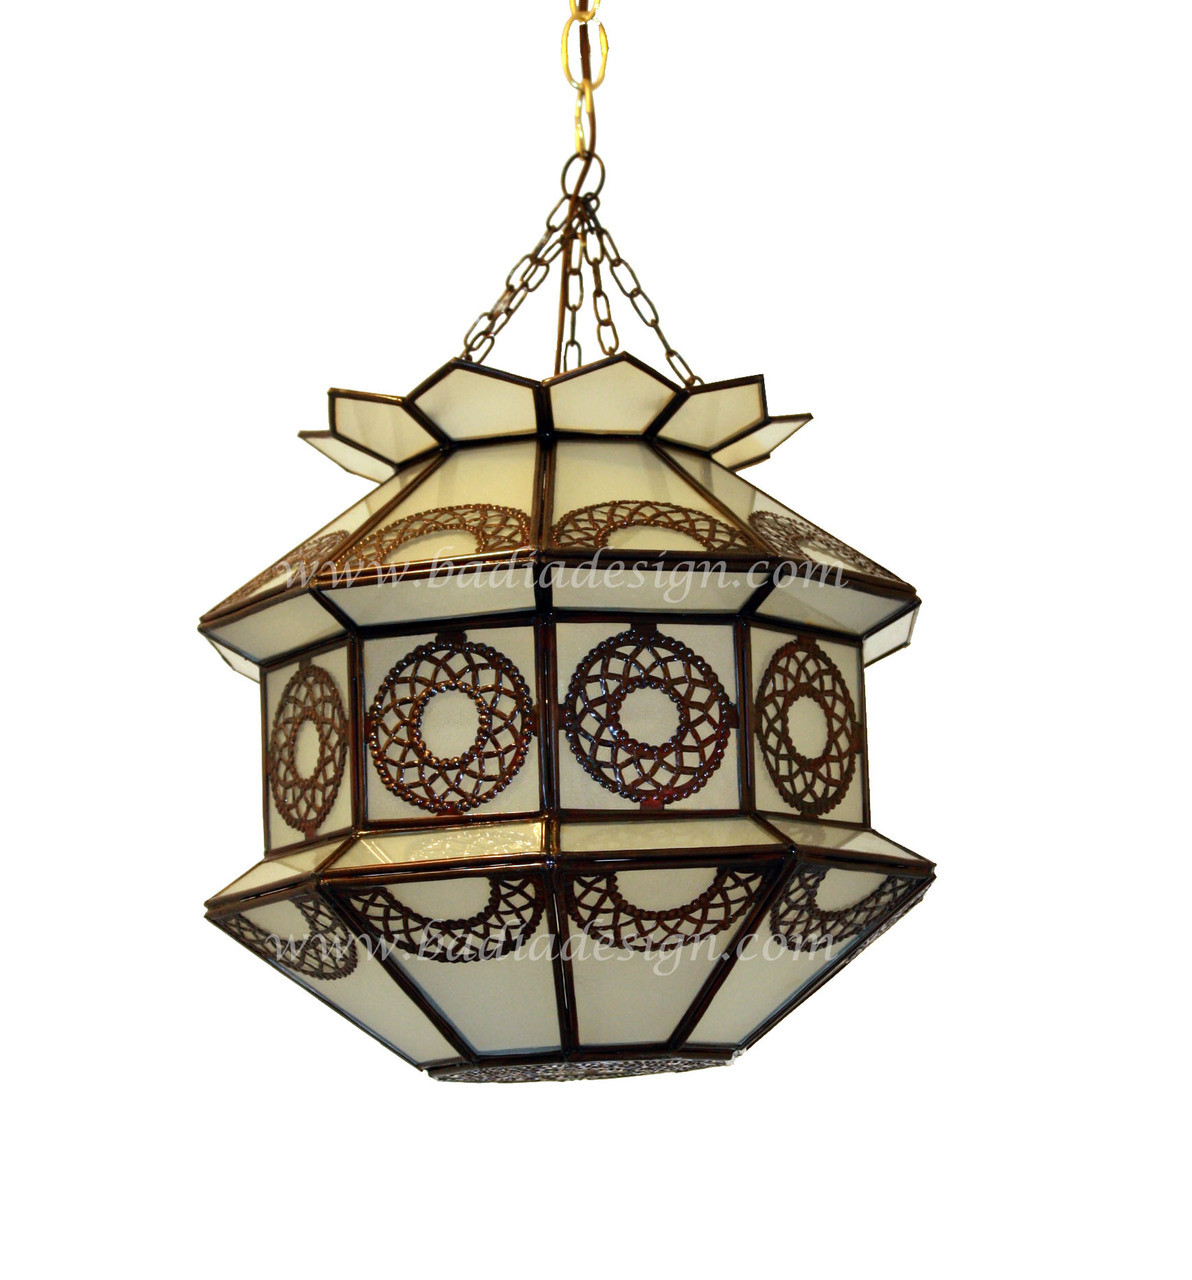 Moroccan Hanging Lantern with Clear and White Glass from Badia Design Inc.